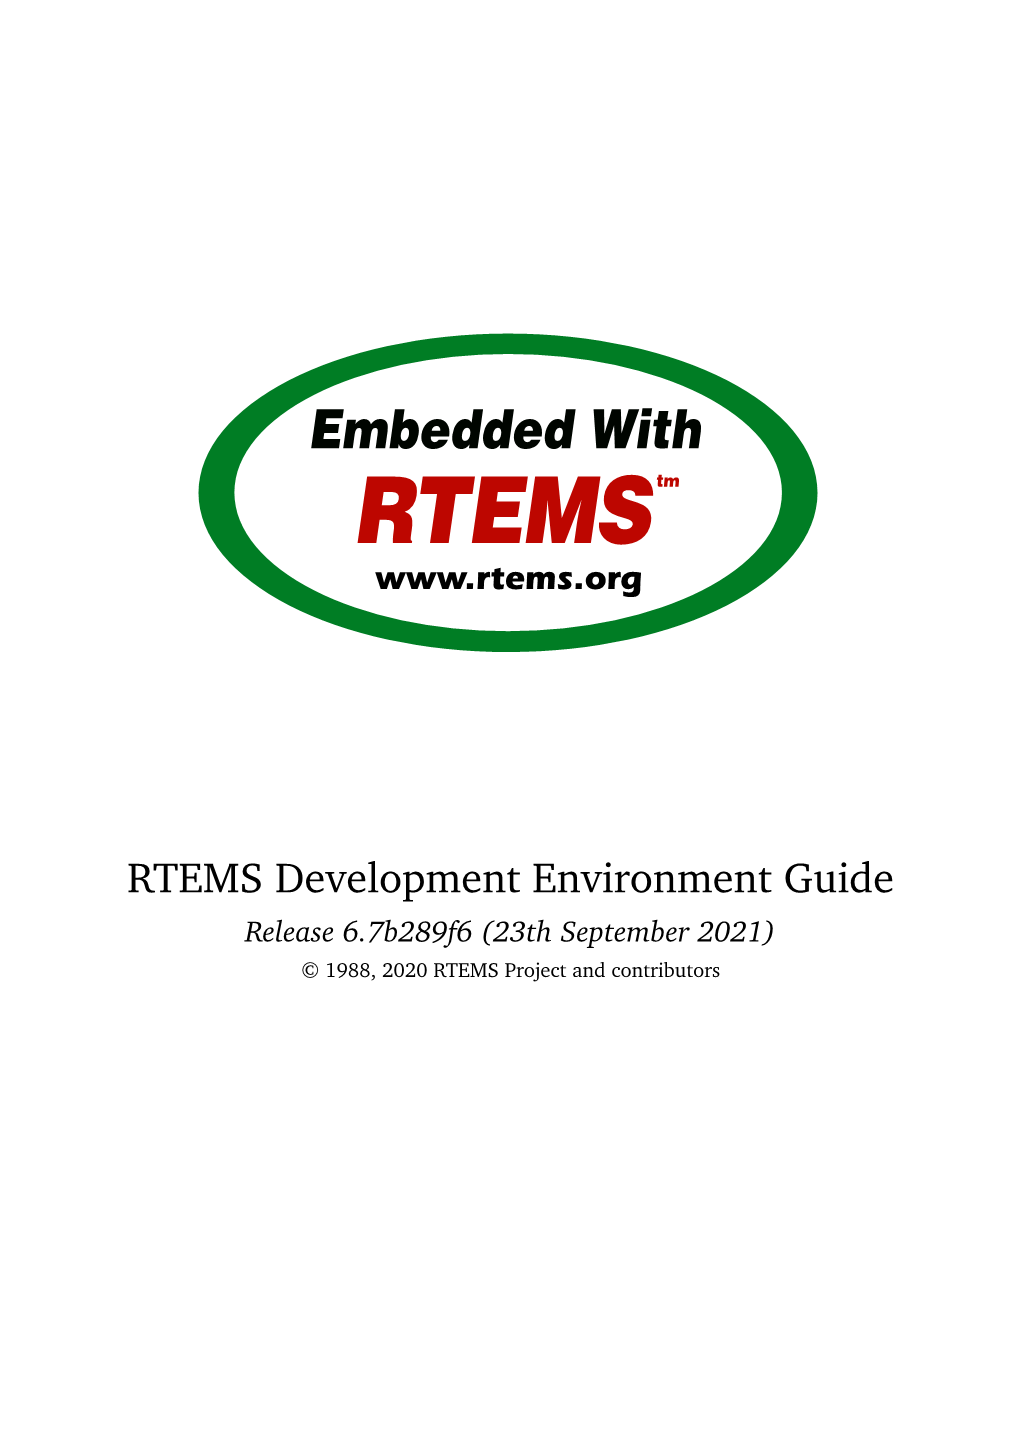 RTEMS Development Environment Guide Release 6.7B289f6 (23Th September 2021) © 1988, 2020 RTEMS Project and Contributors